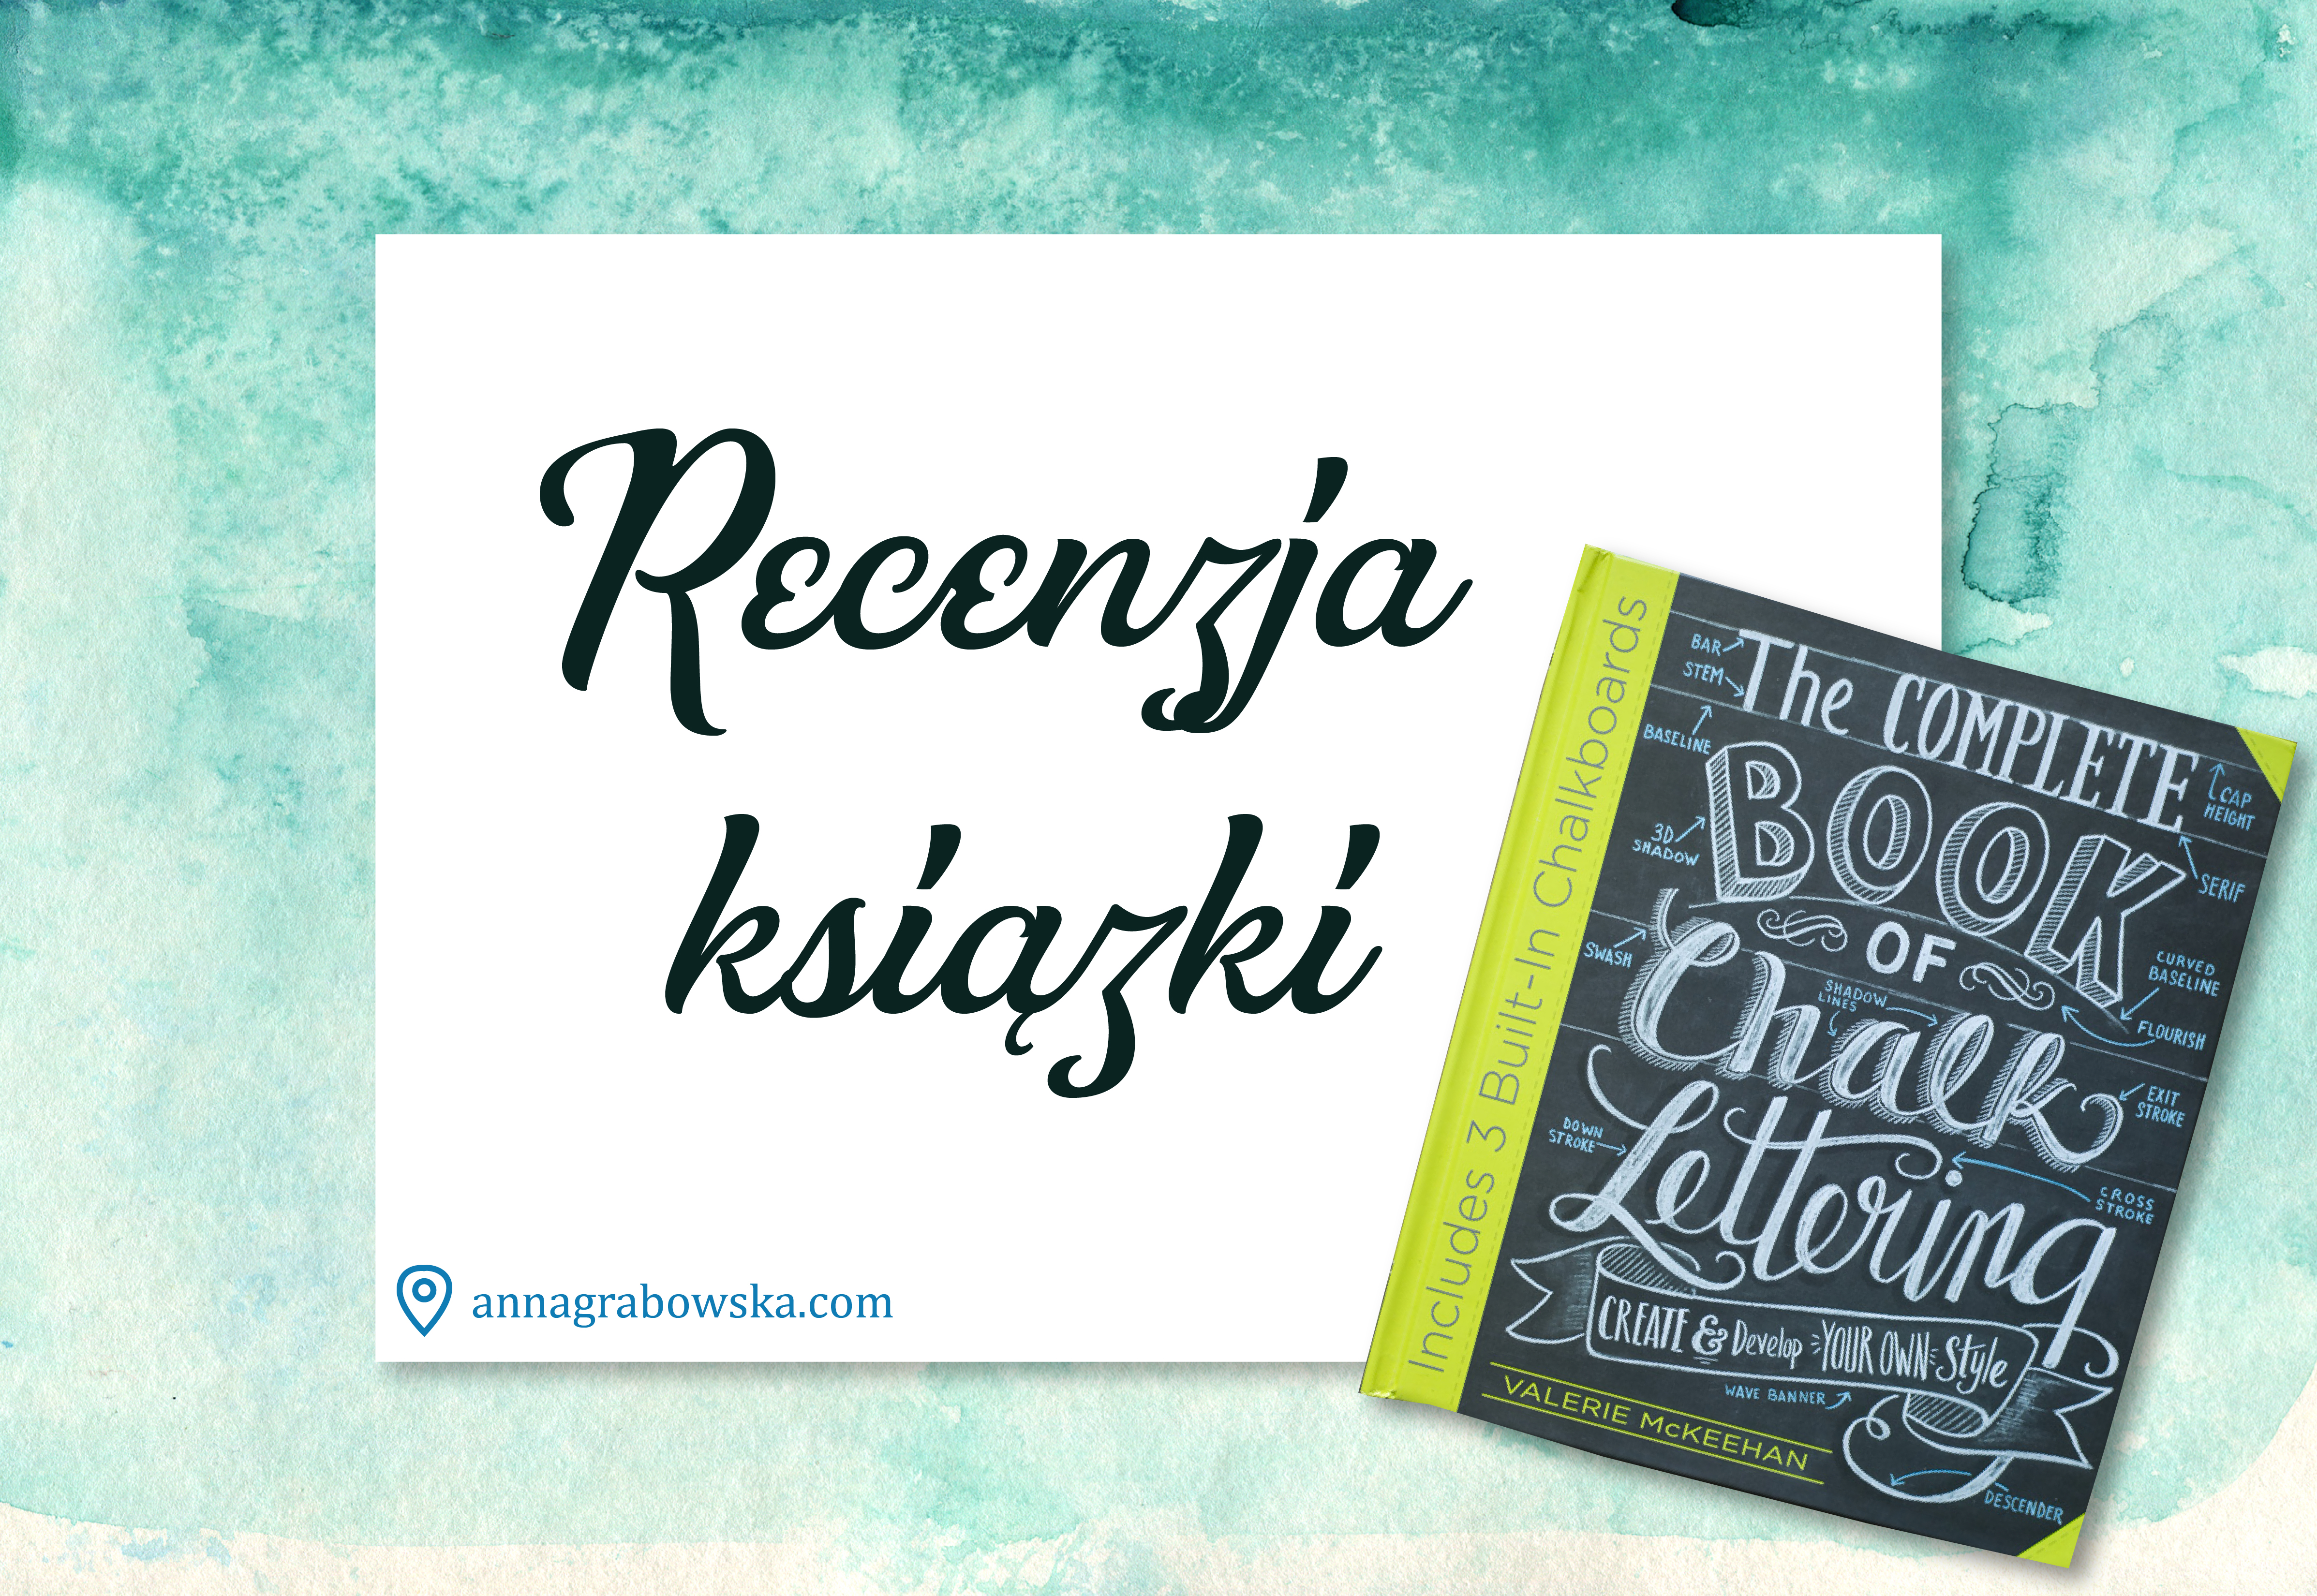 The complete book of chalk lettering – recenzja